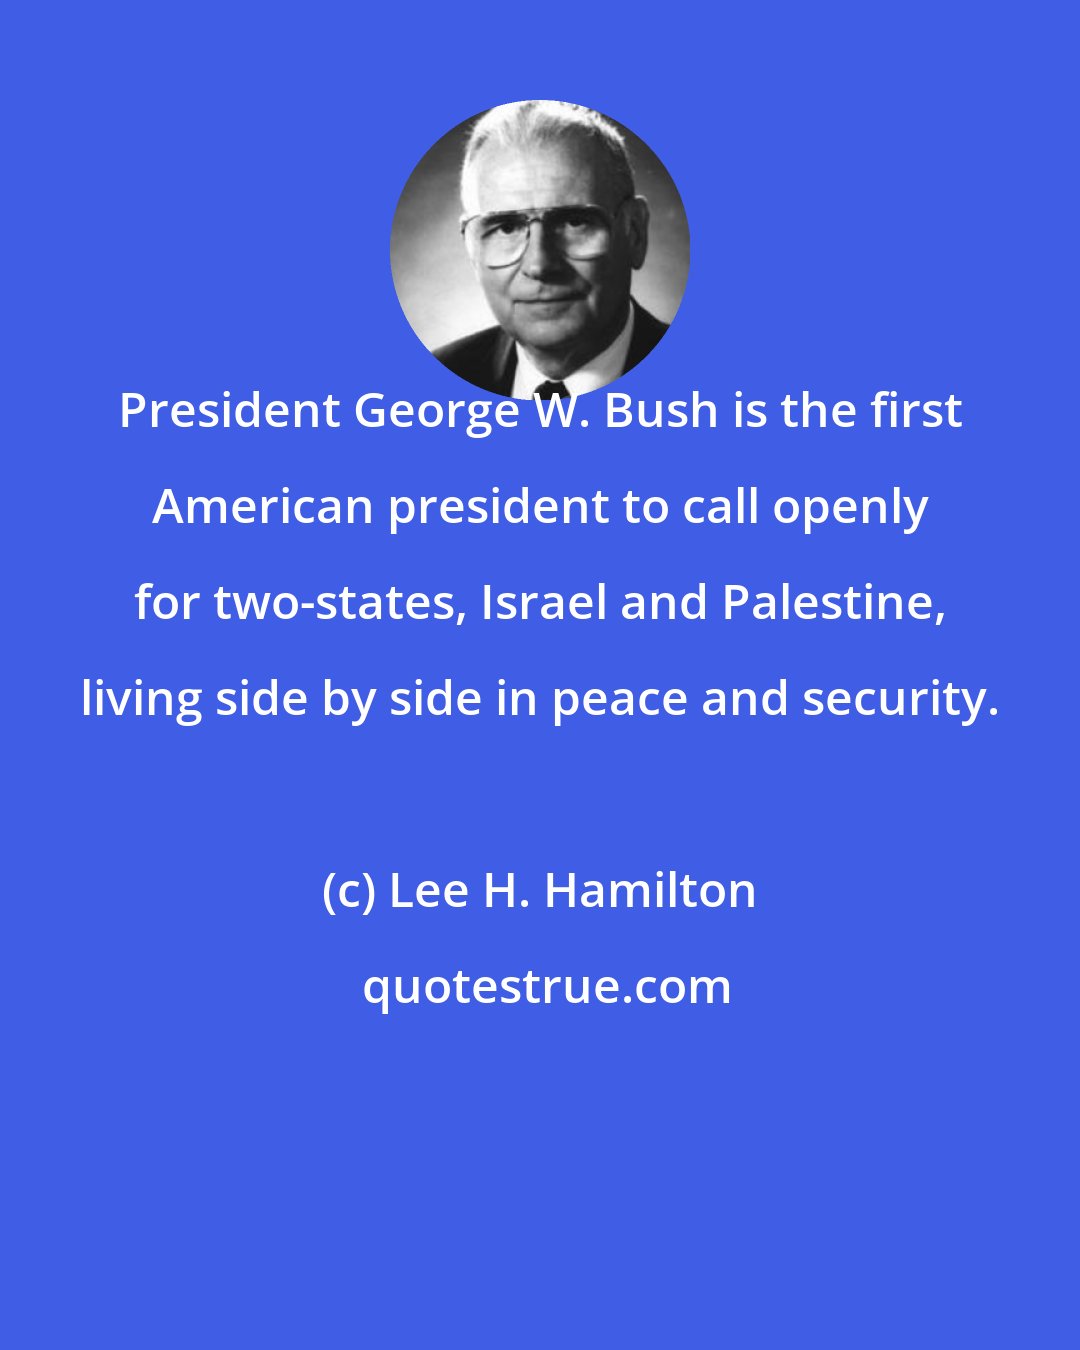 Lee H. Hamilton: President George W. Bush is the first American president to call openly for two-states, Israel and Palestine, living side by side in peace and security.